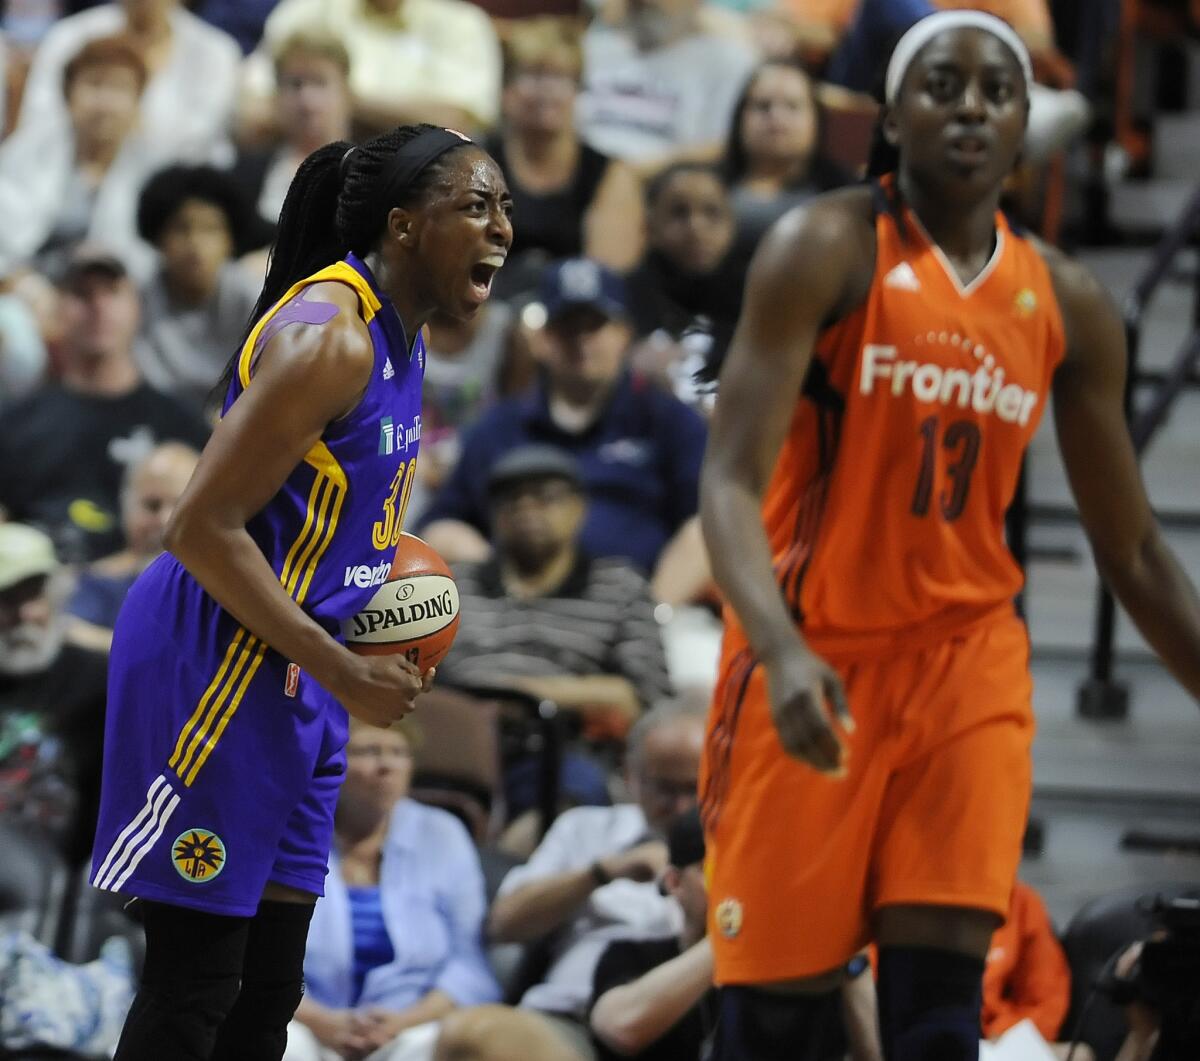 Sparks forward Nneka Ogwumike, left, reacts after forcing sister and Connecticut Sun forward Chiney Ogwumike, right, into a shot clock violation during the second half.